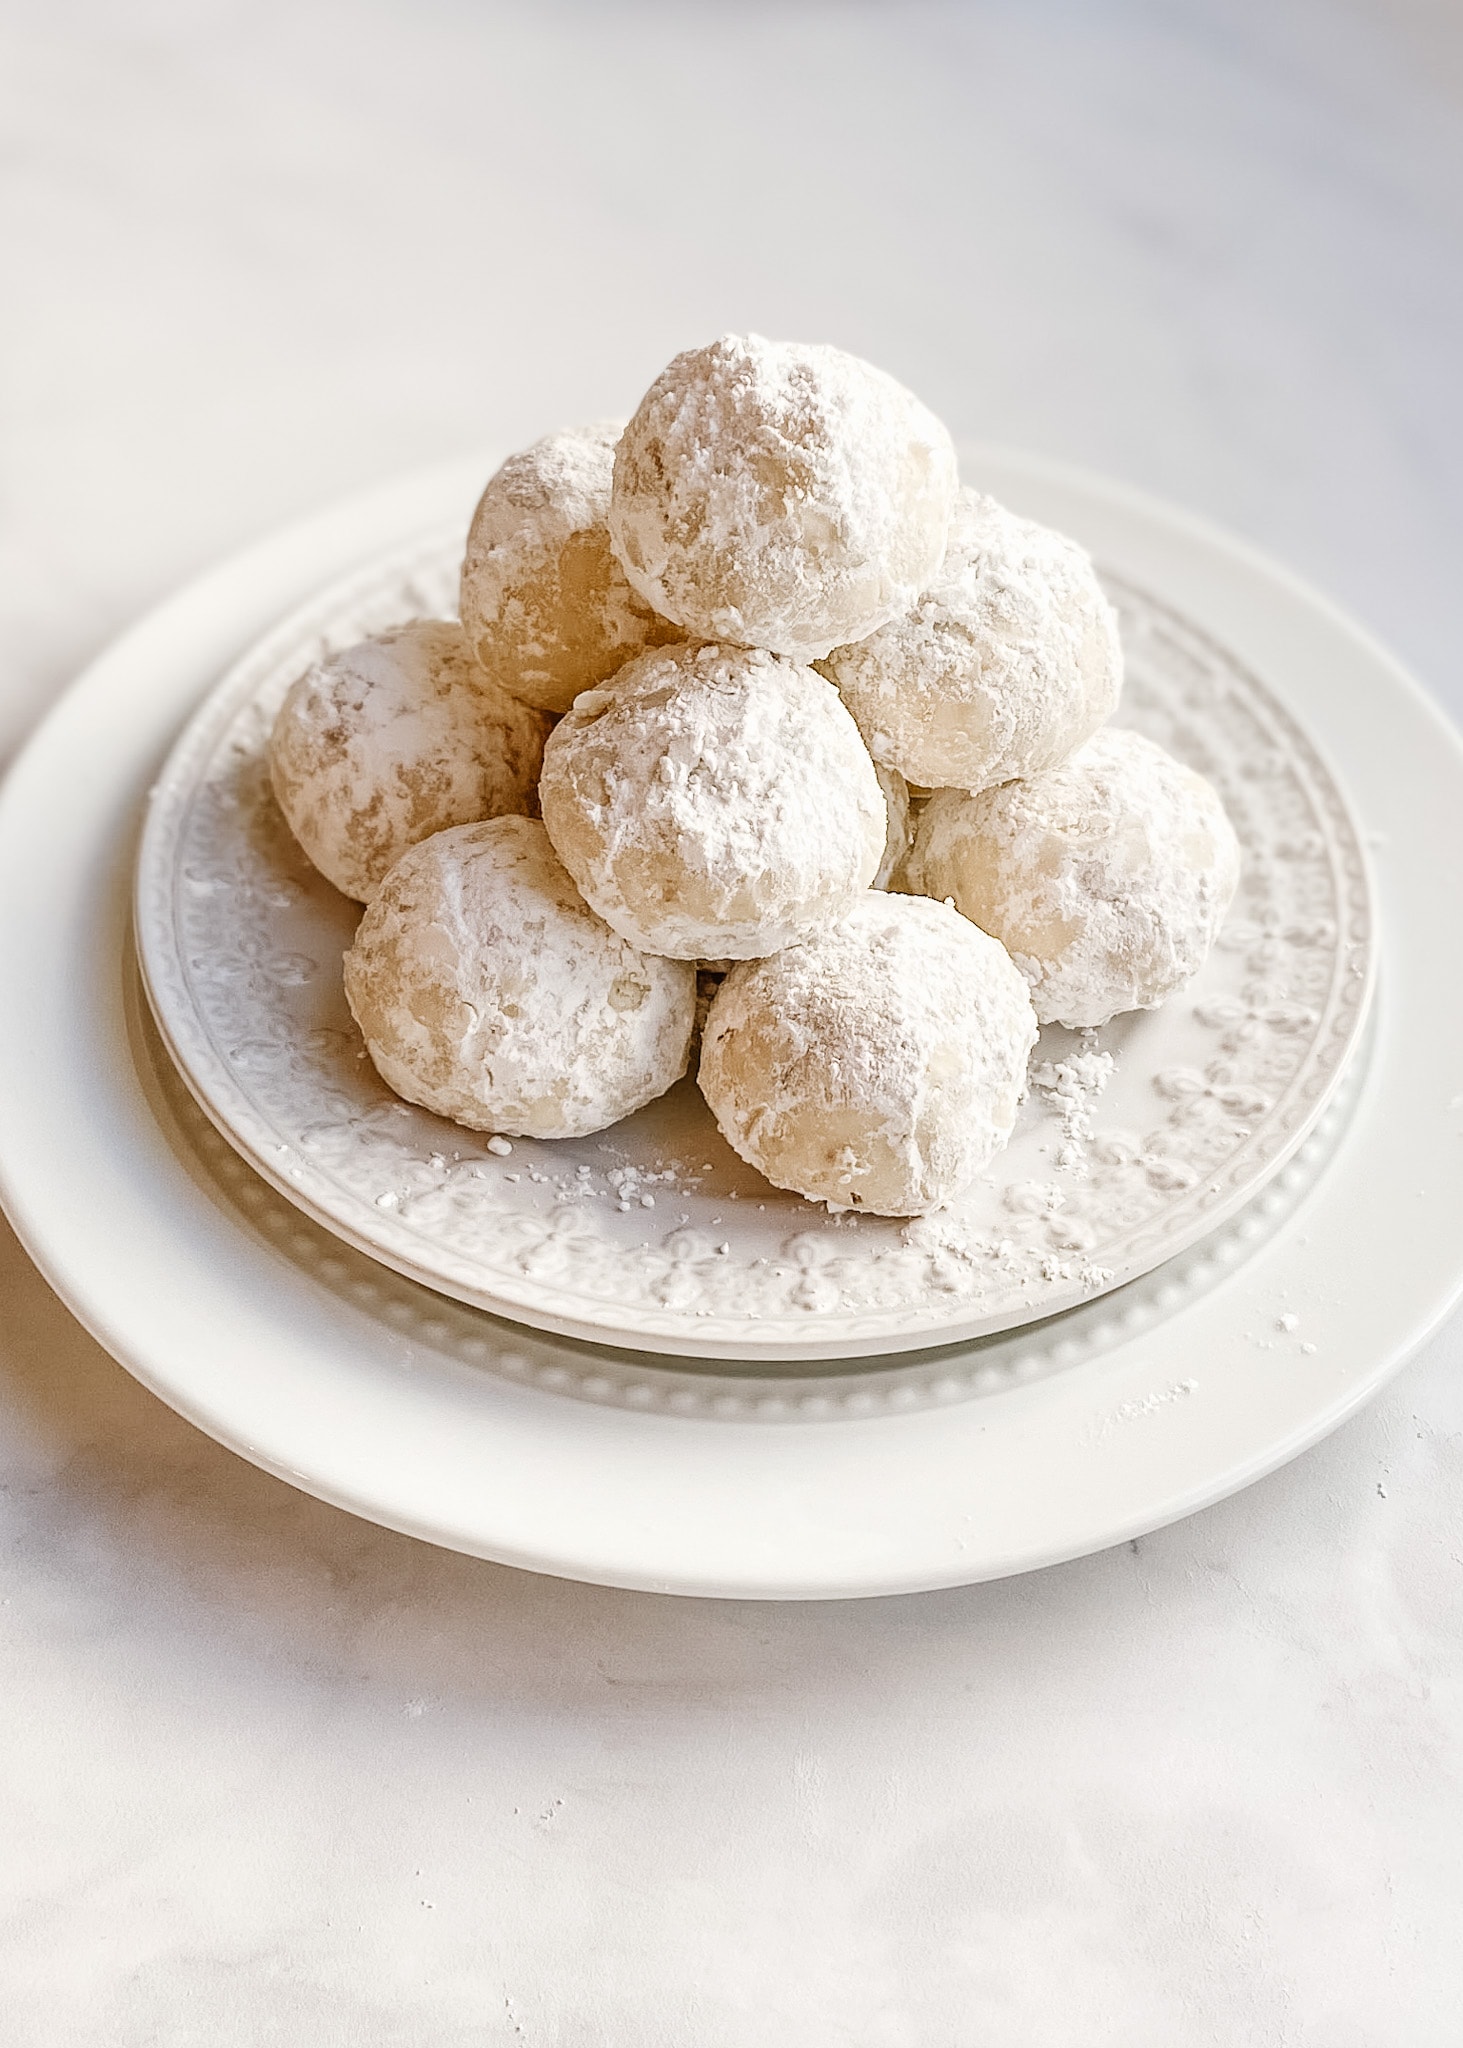 A plate of vegan gluten-free snowball cookies piled tall on a white ceramic plate.